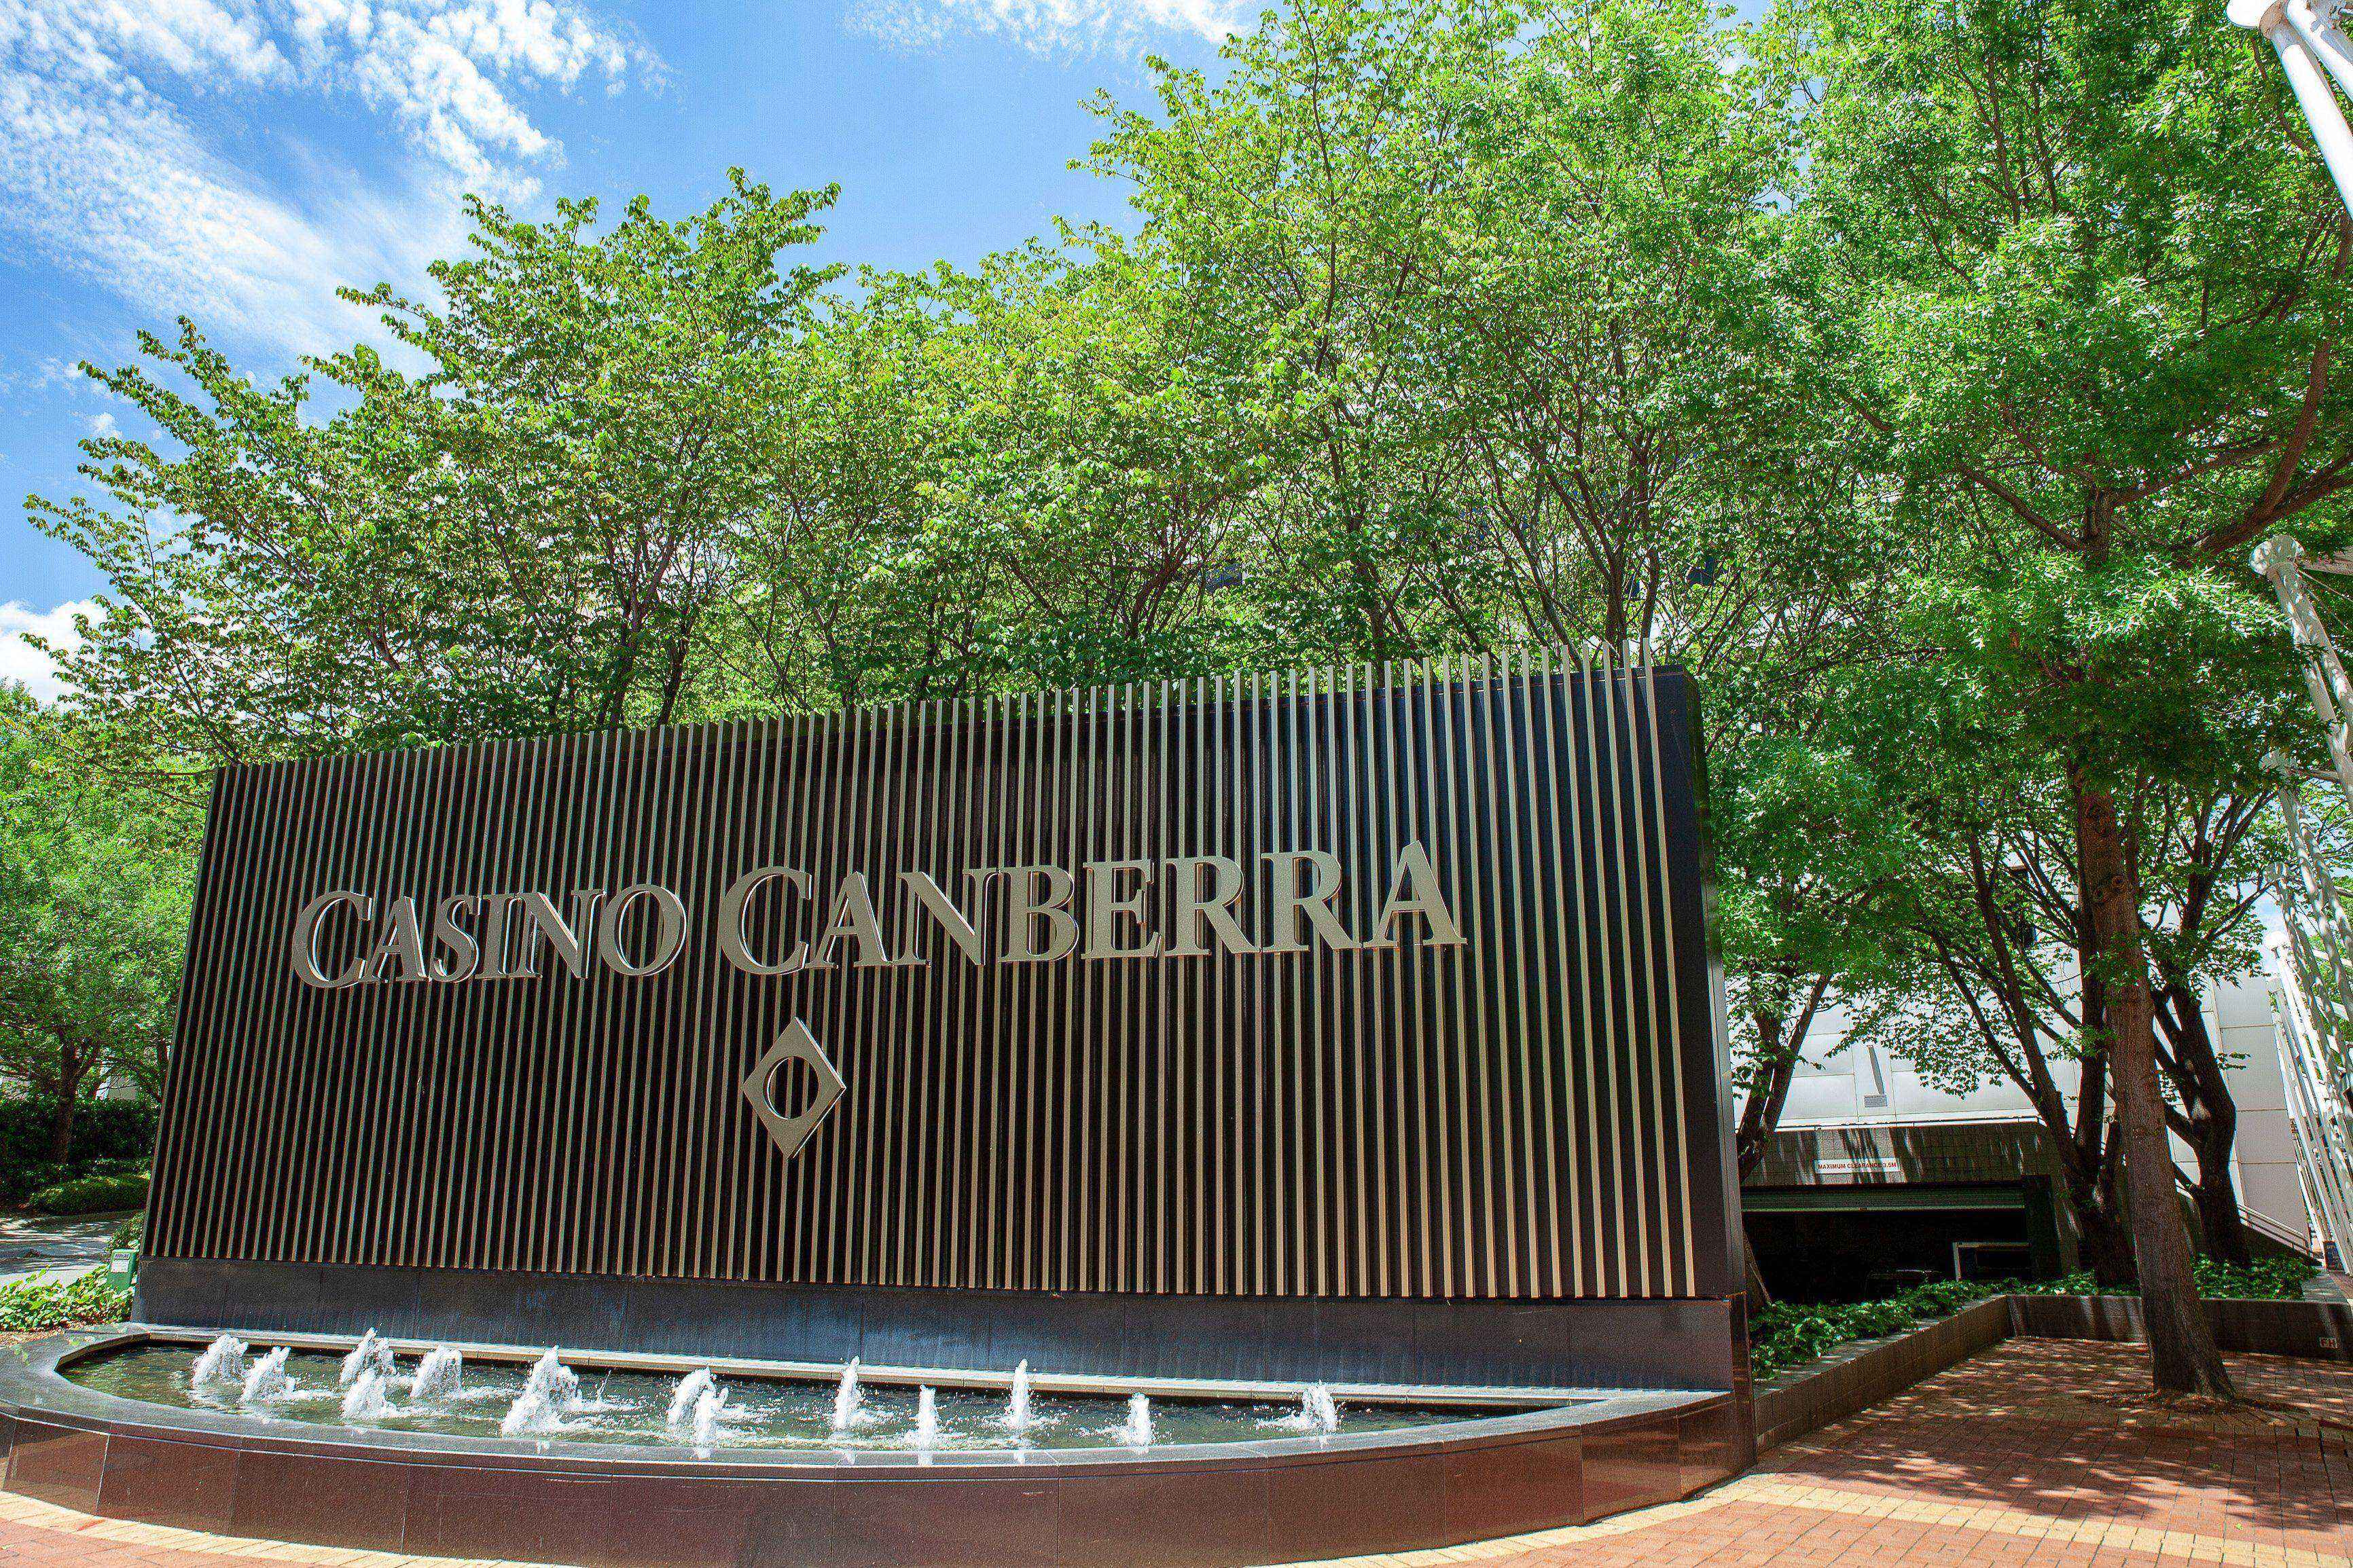 Another bidder ups the ante for Casino Canberra